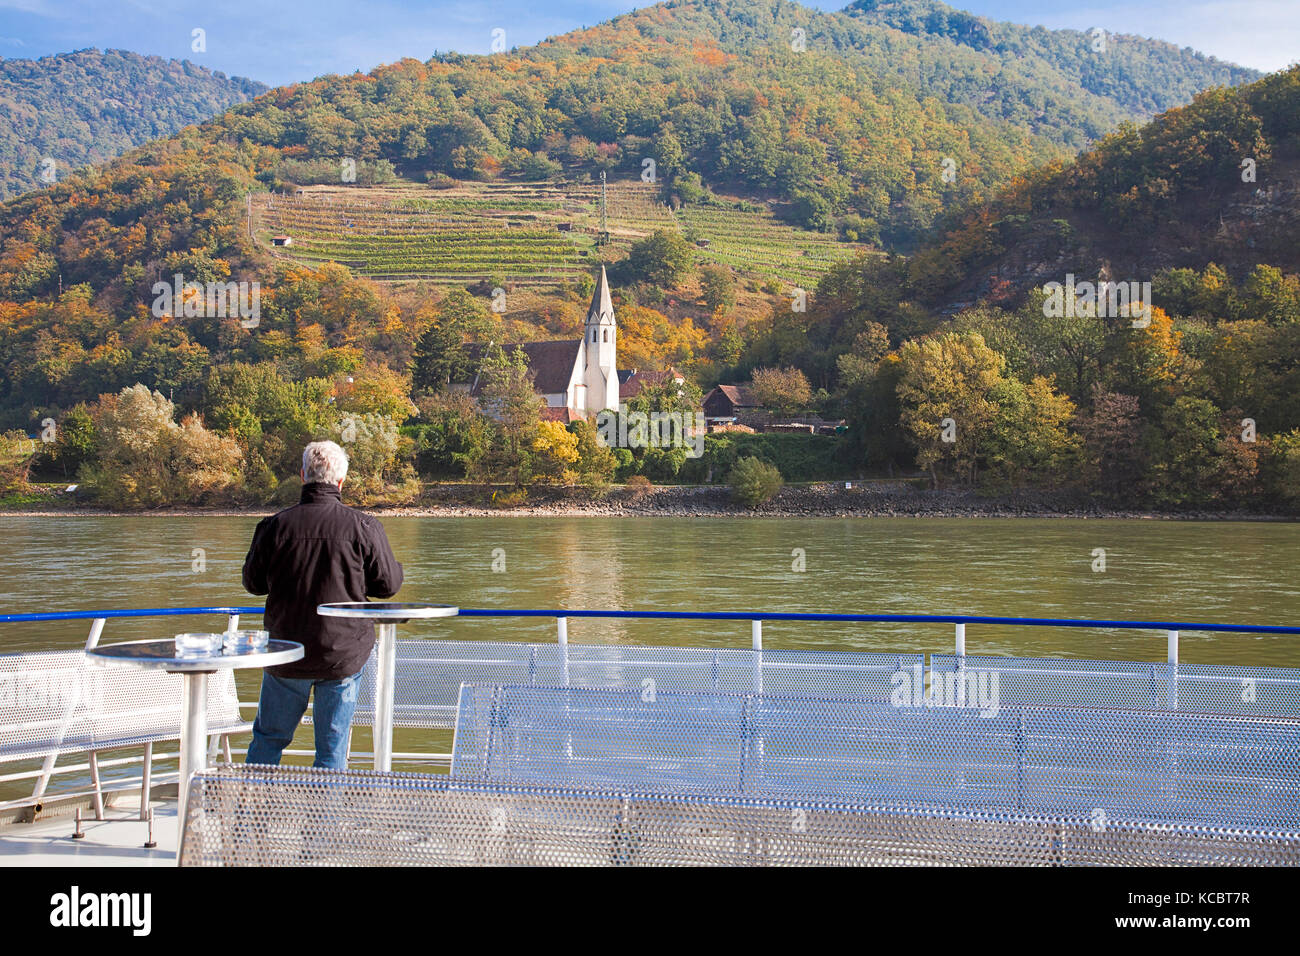 An unidentified traveler views the fall scenery and vineyards, Wachau Valley, Danube River, Austria. Stock Photo